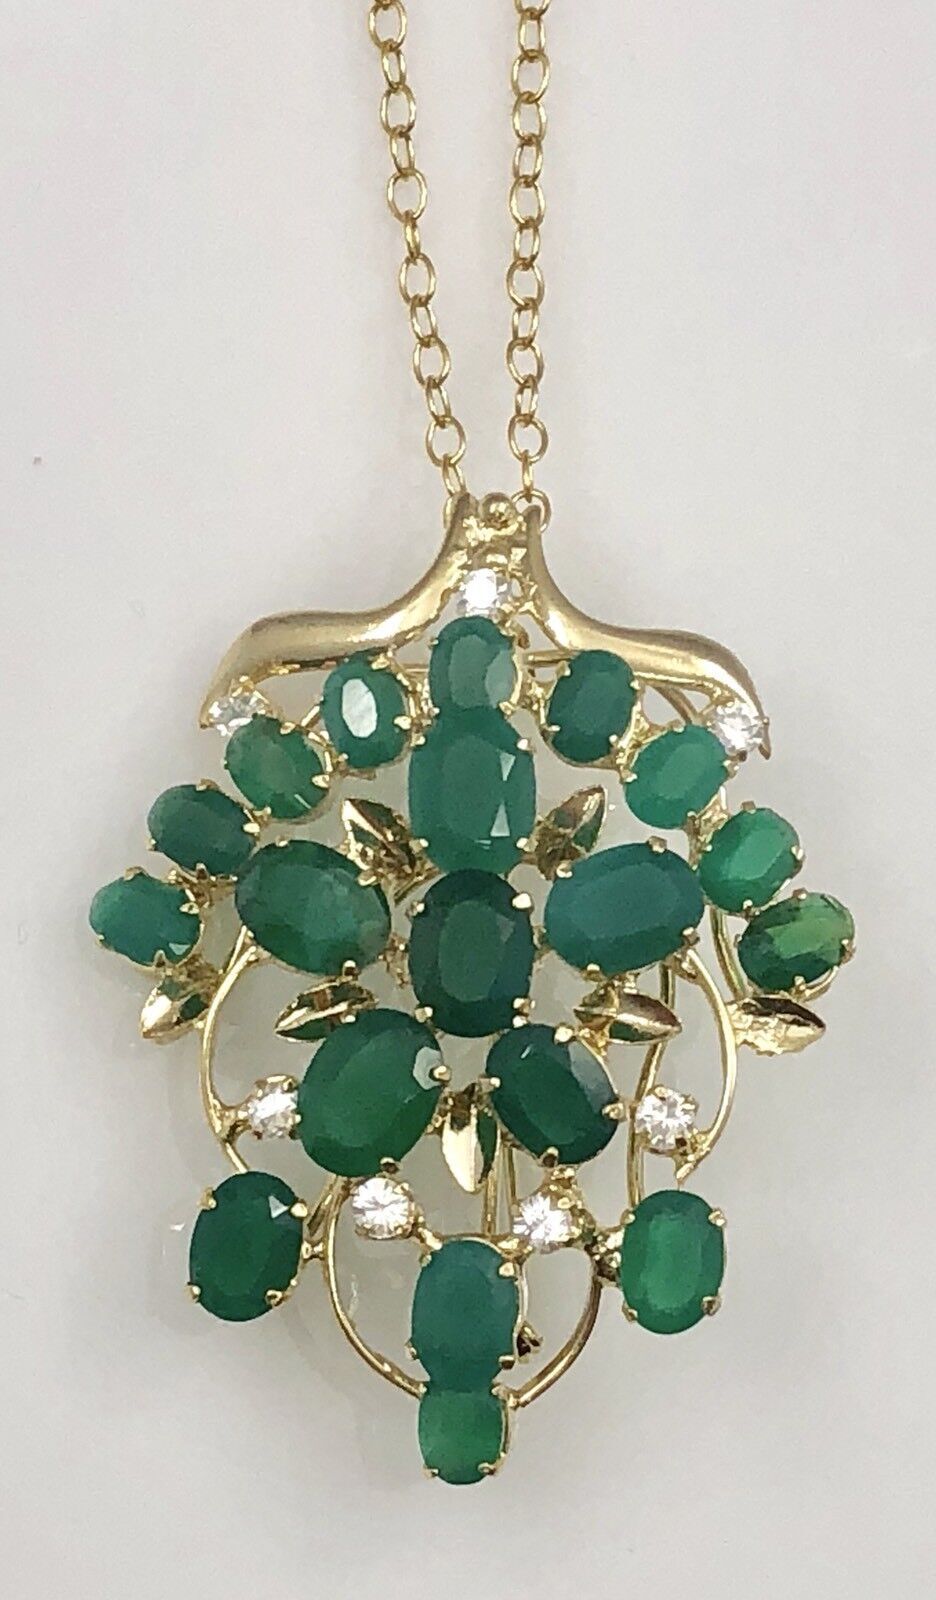 Genuine Green Chalcedony Cluster Pin or Pendant 22kt HGE, New, Size 2"